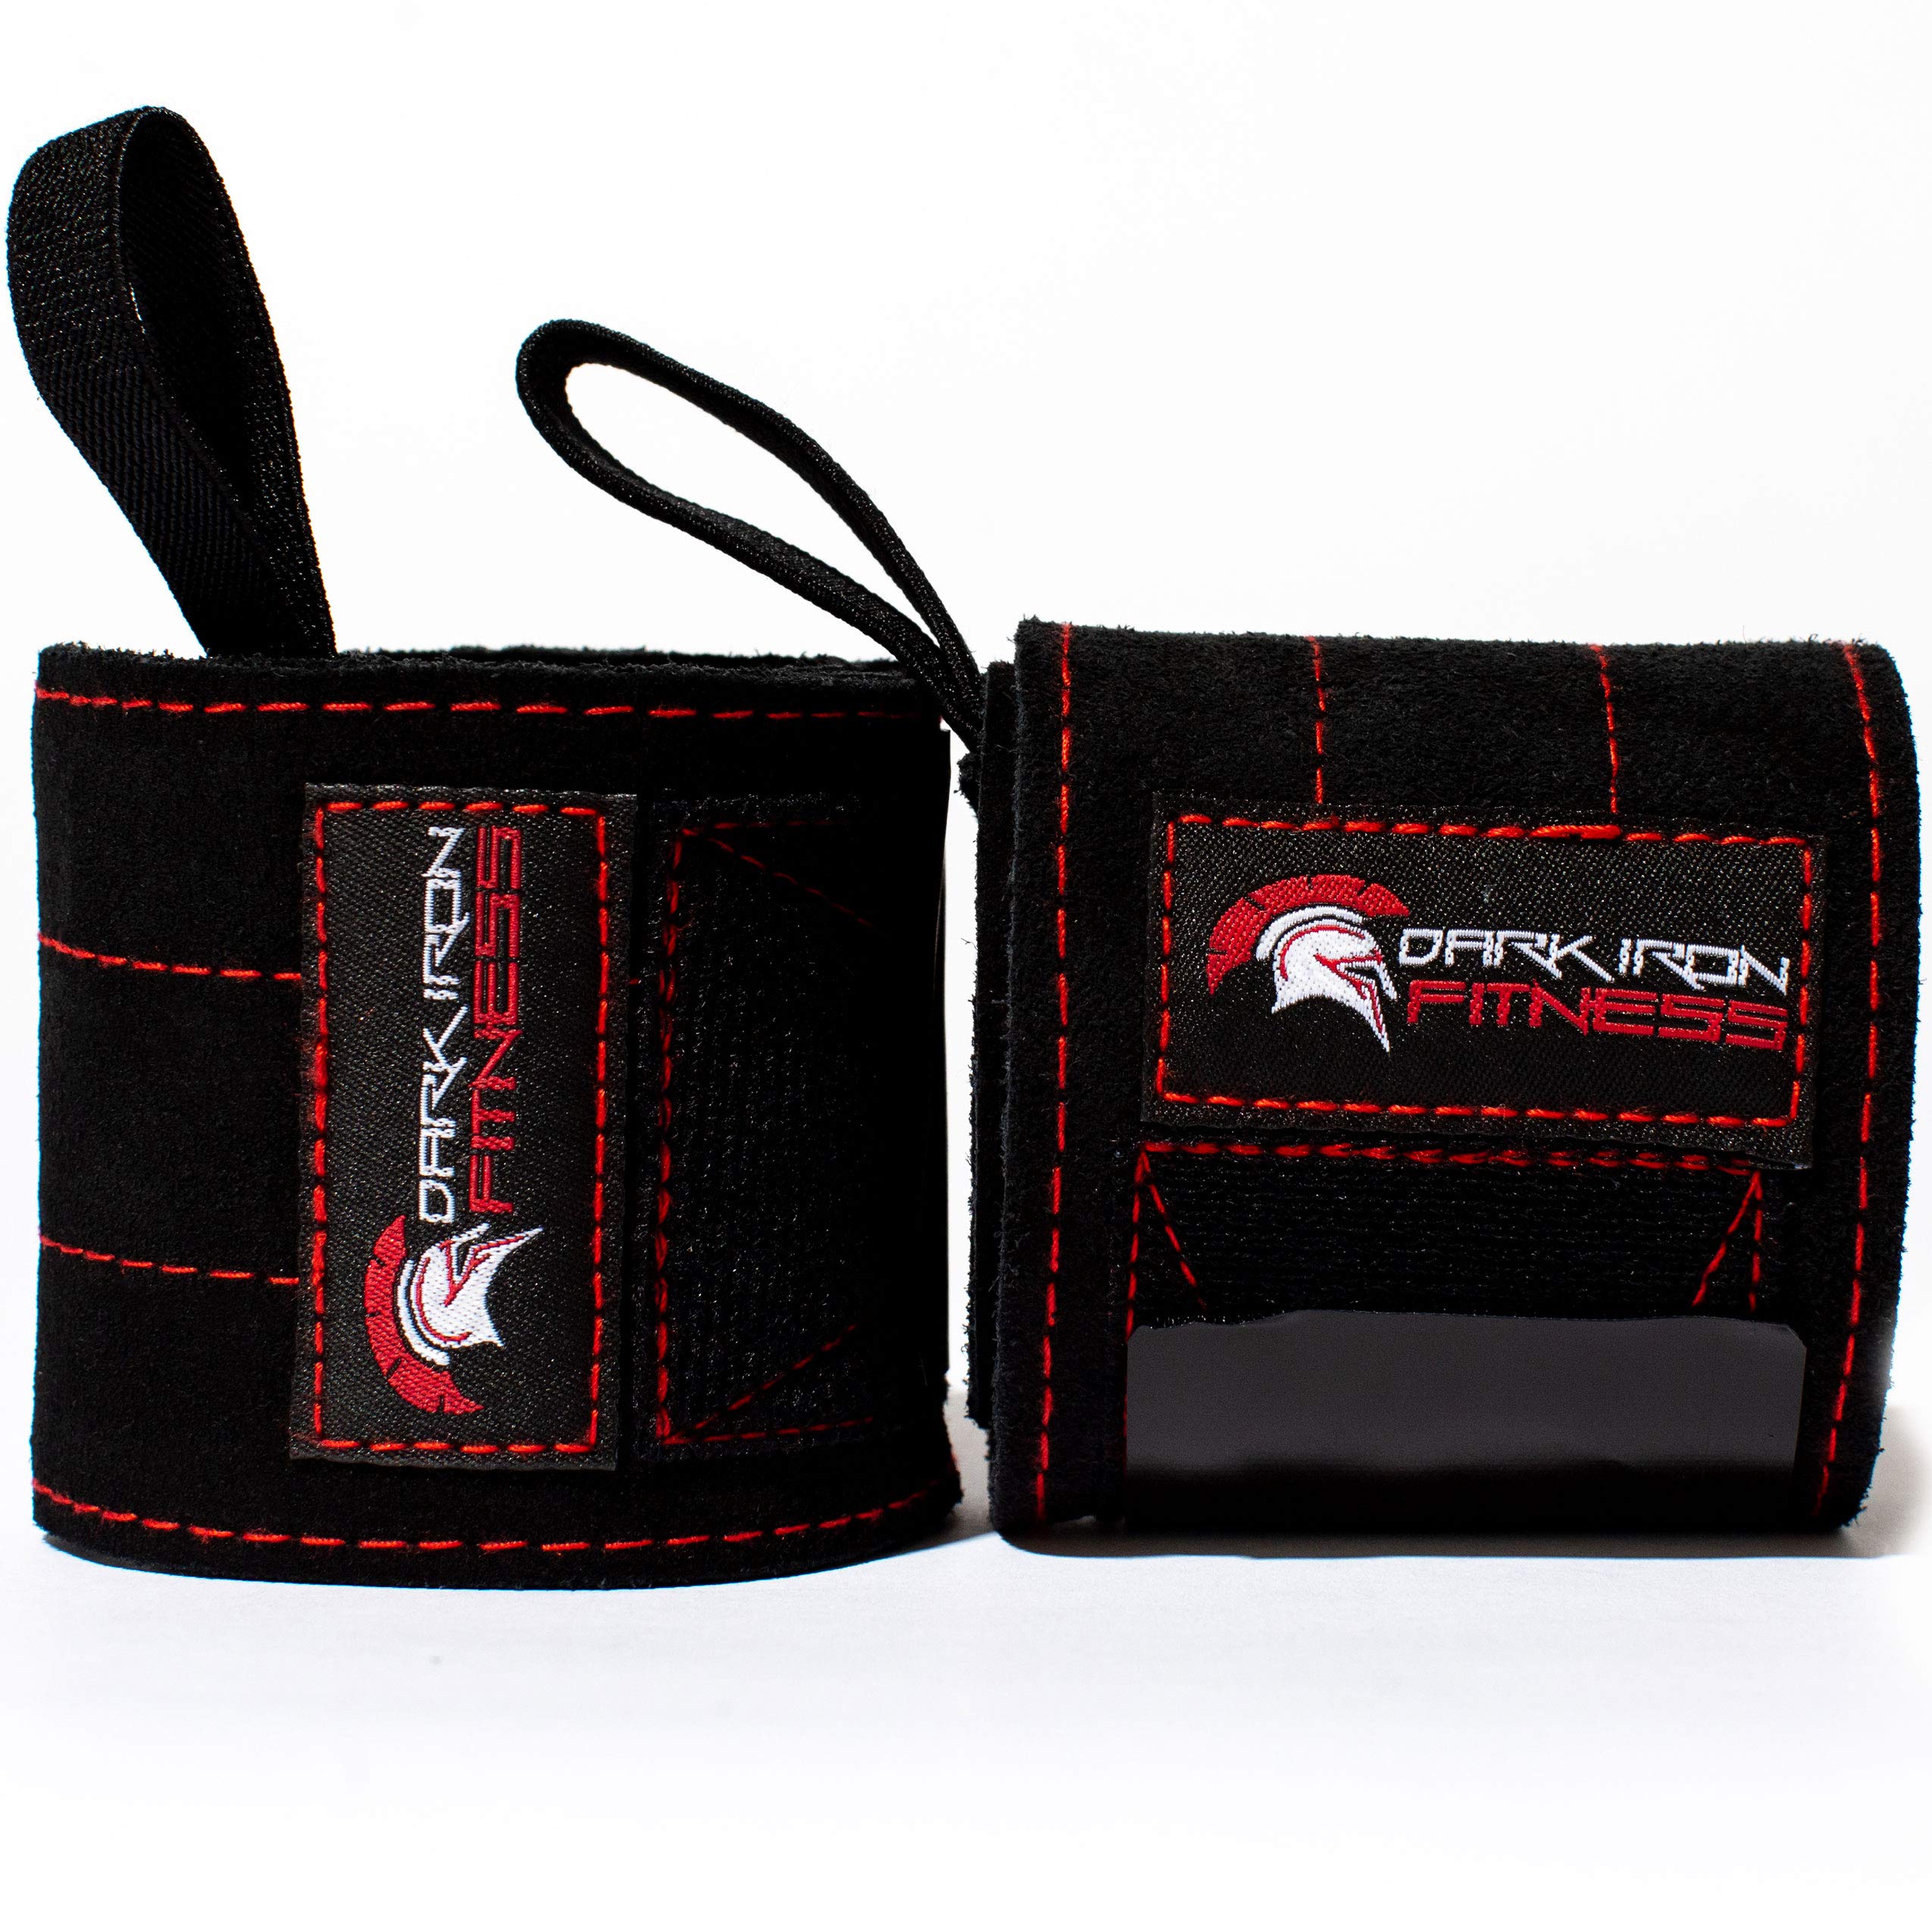 Dark Iron Fitness Leather Weight Lifting Wrist Wraps - Brace for Lifting